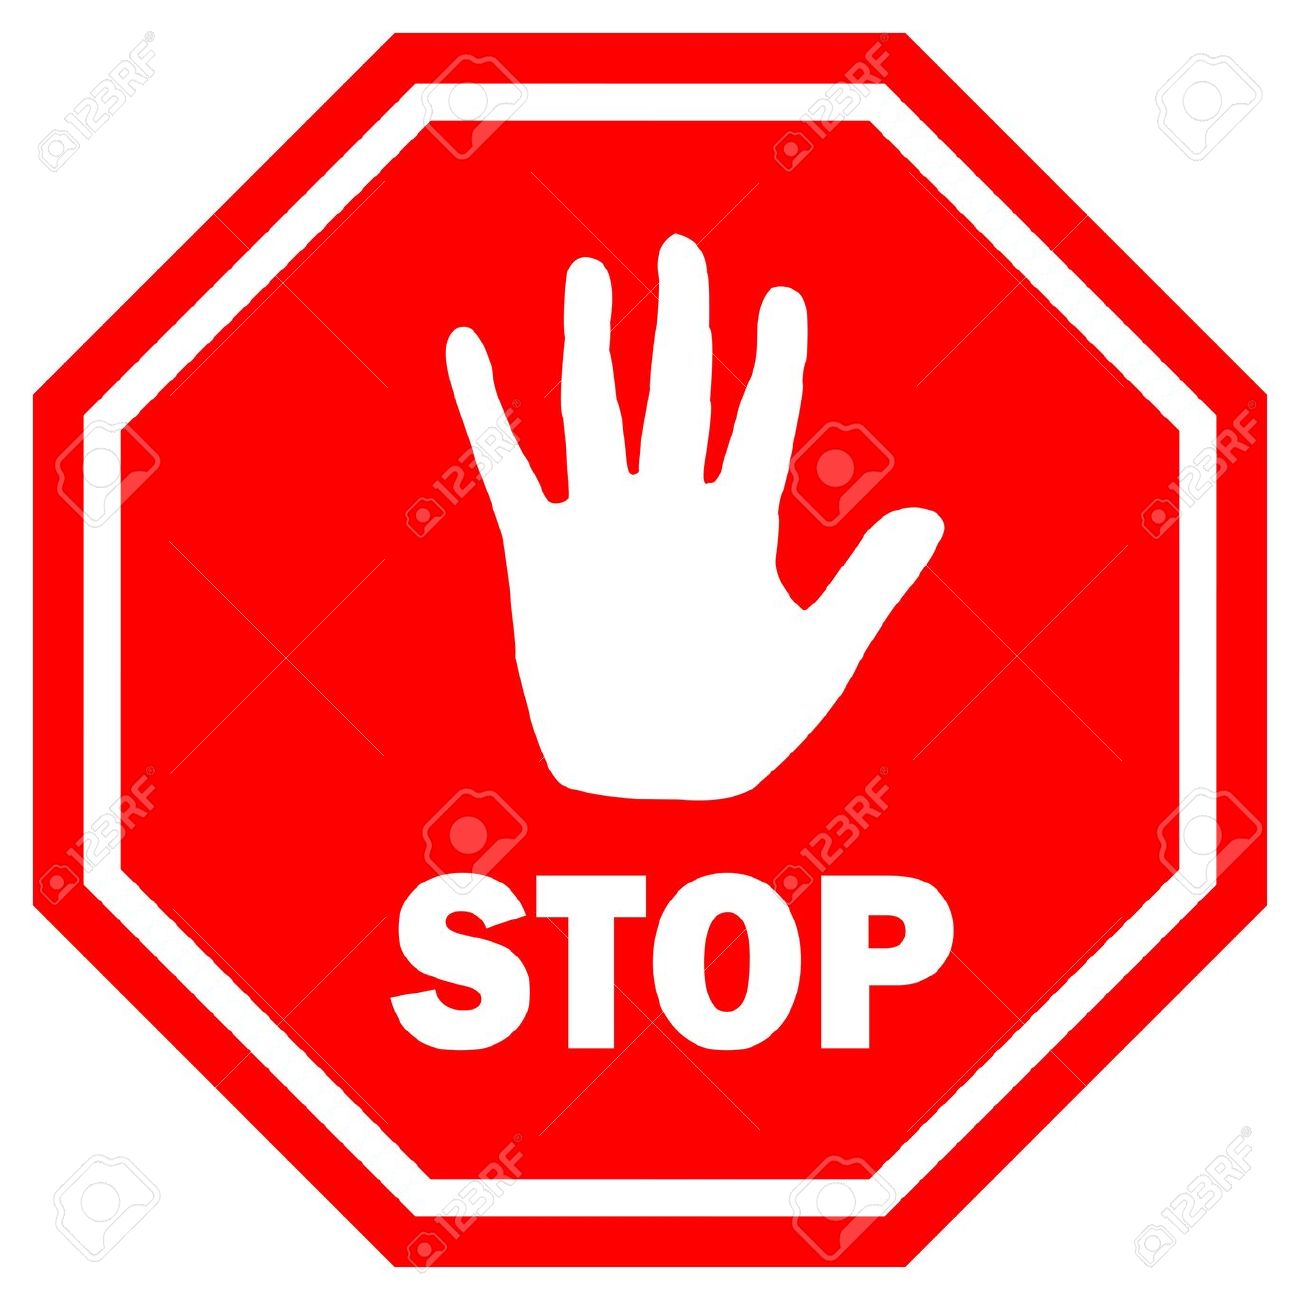 image-of-stop-signs-clipart-best